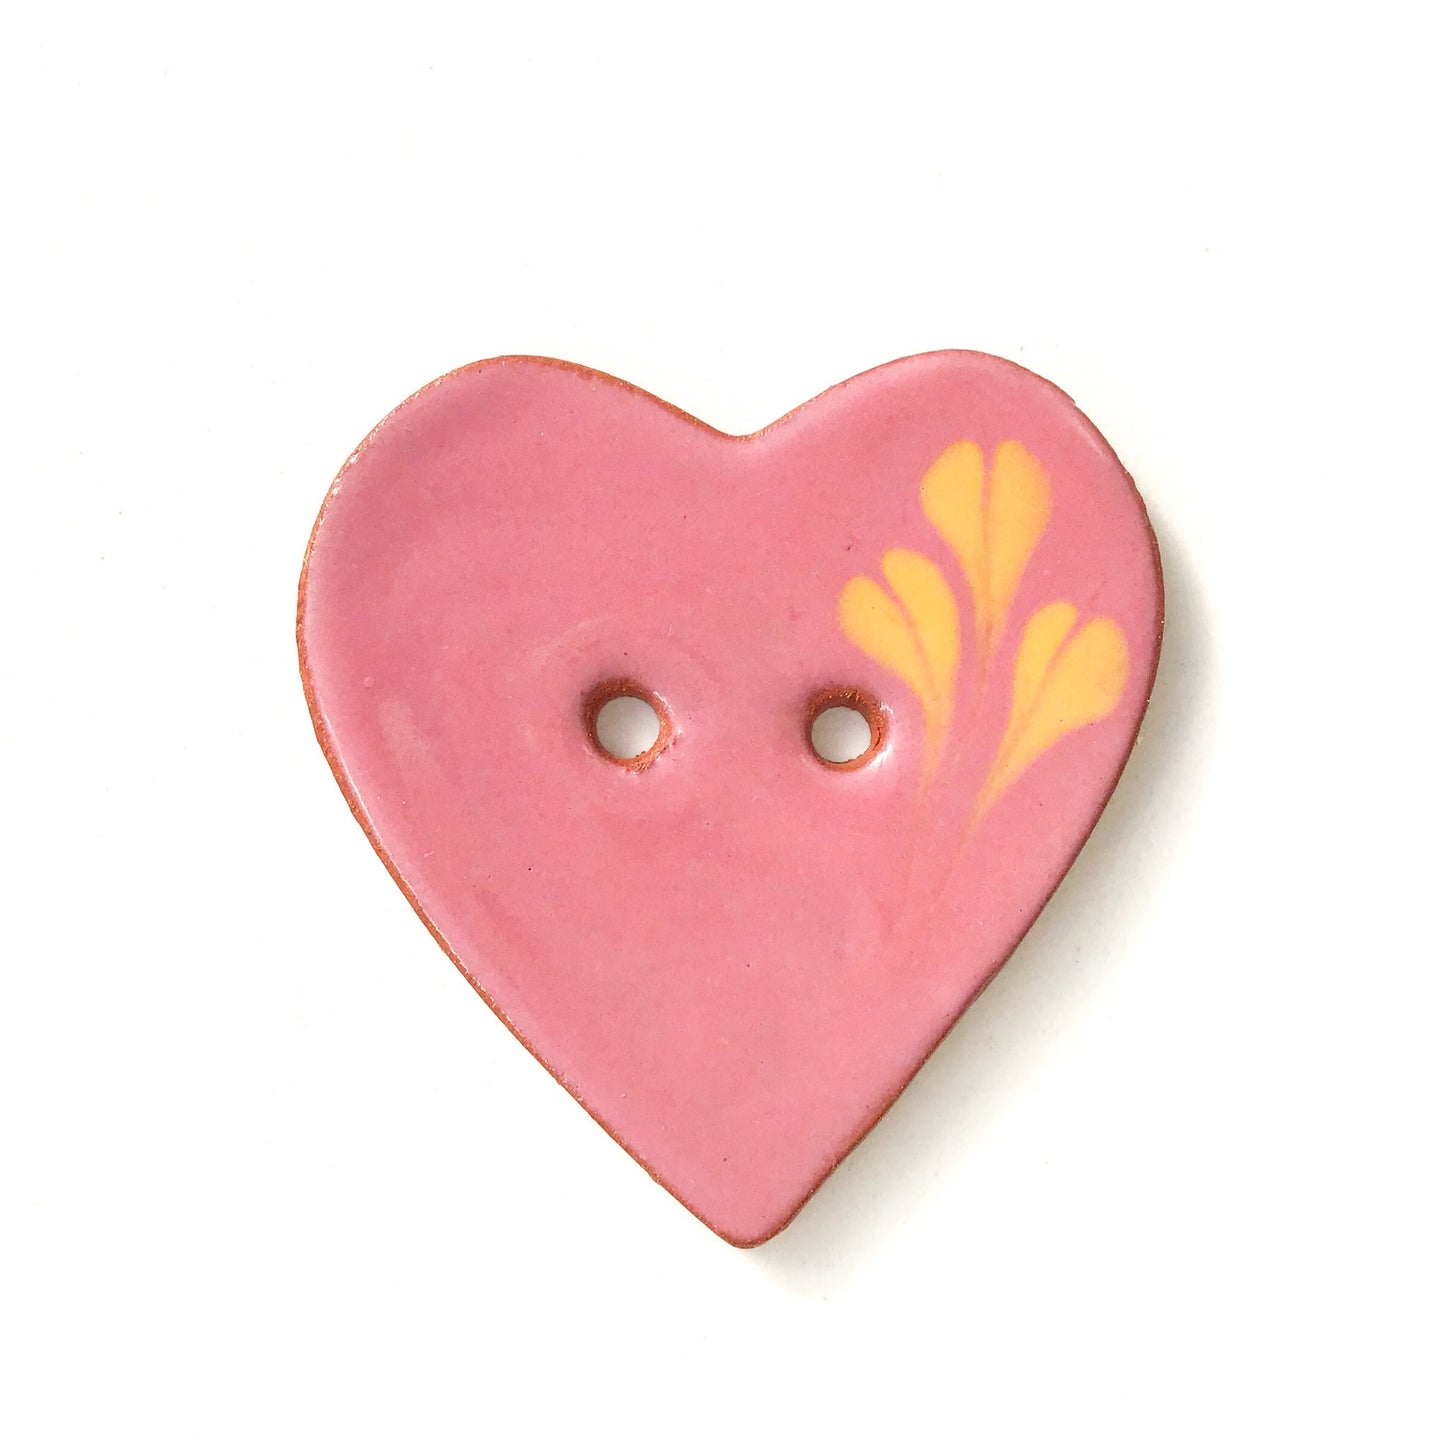 (Wholesale Accounts Only) 1 3/8" Heart Leaflet - flat - red clay